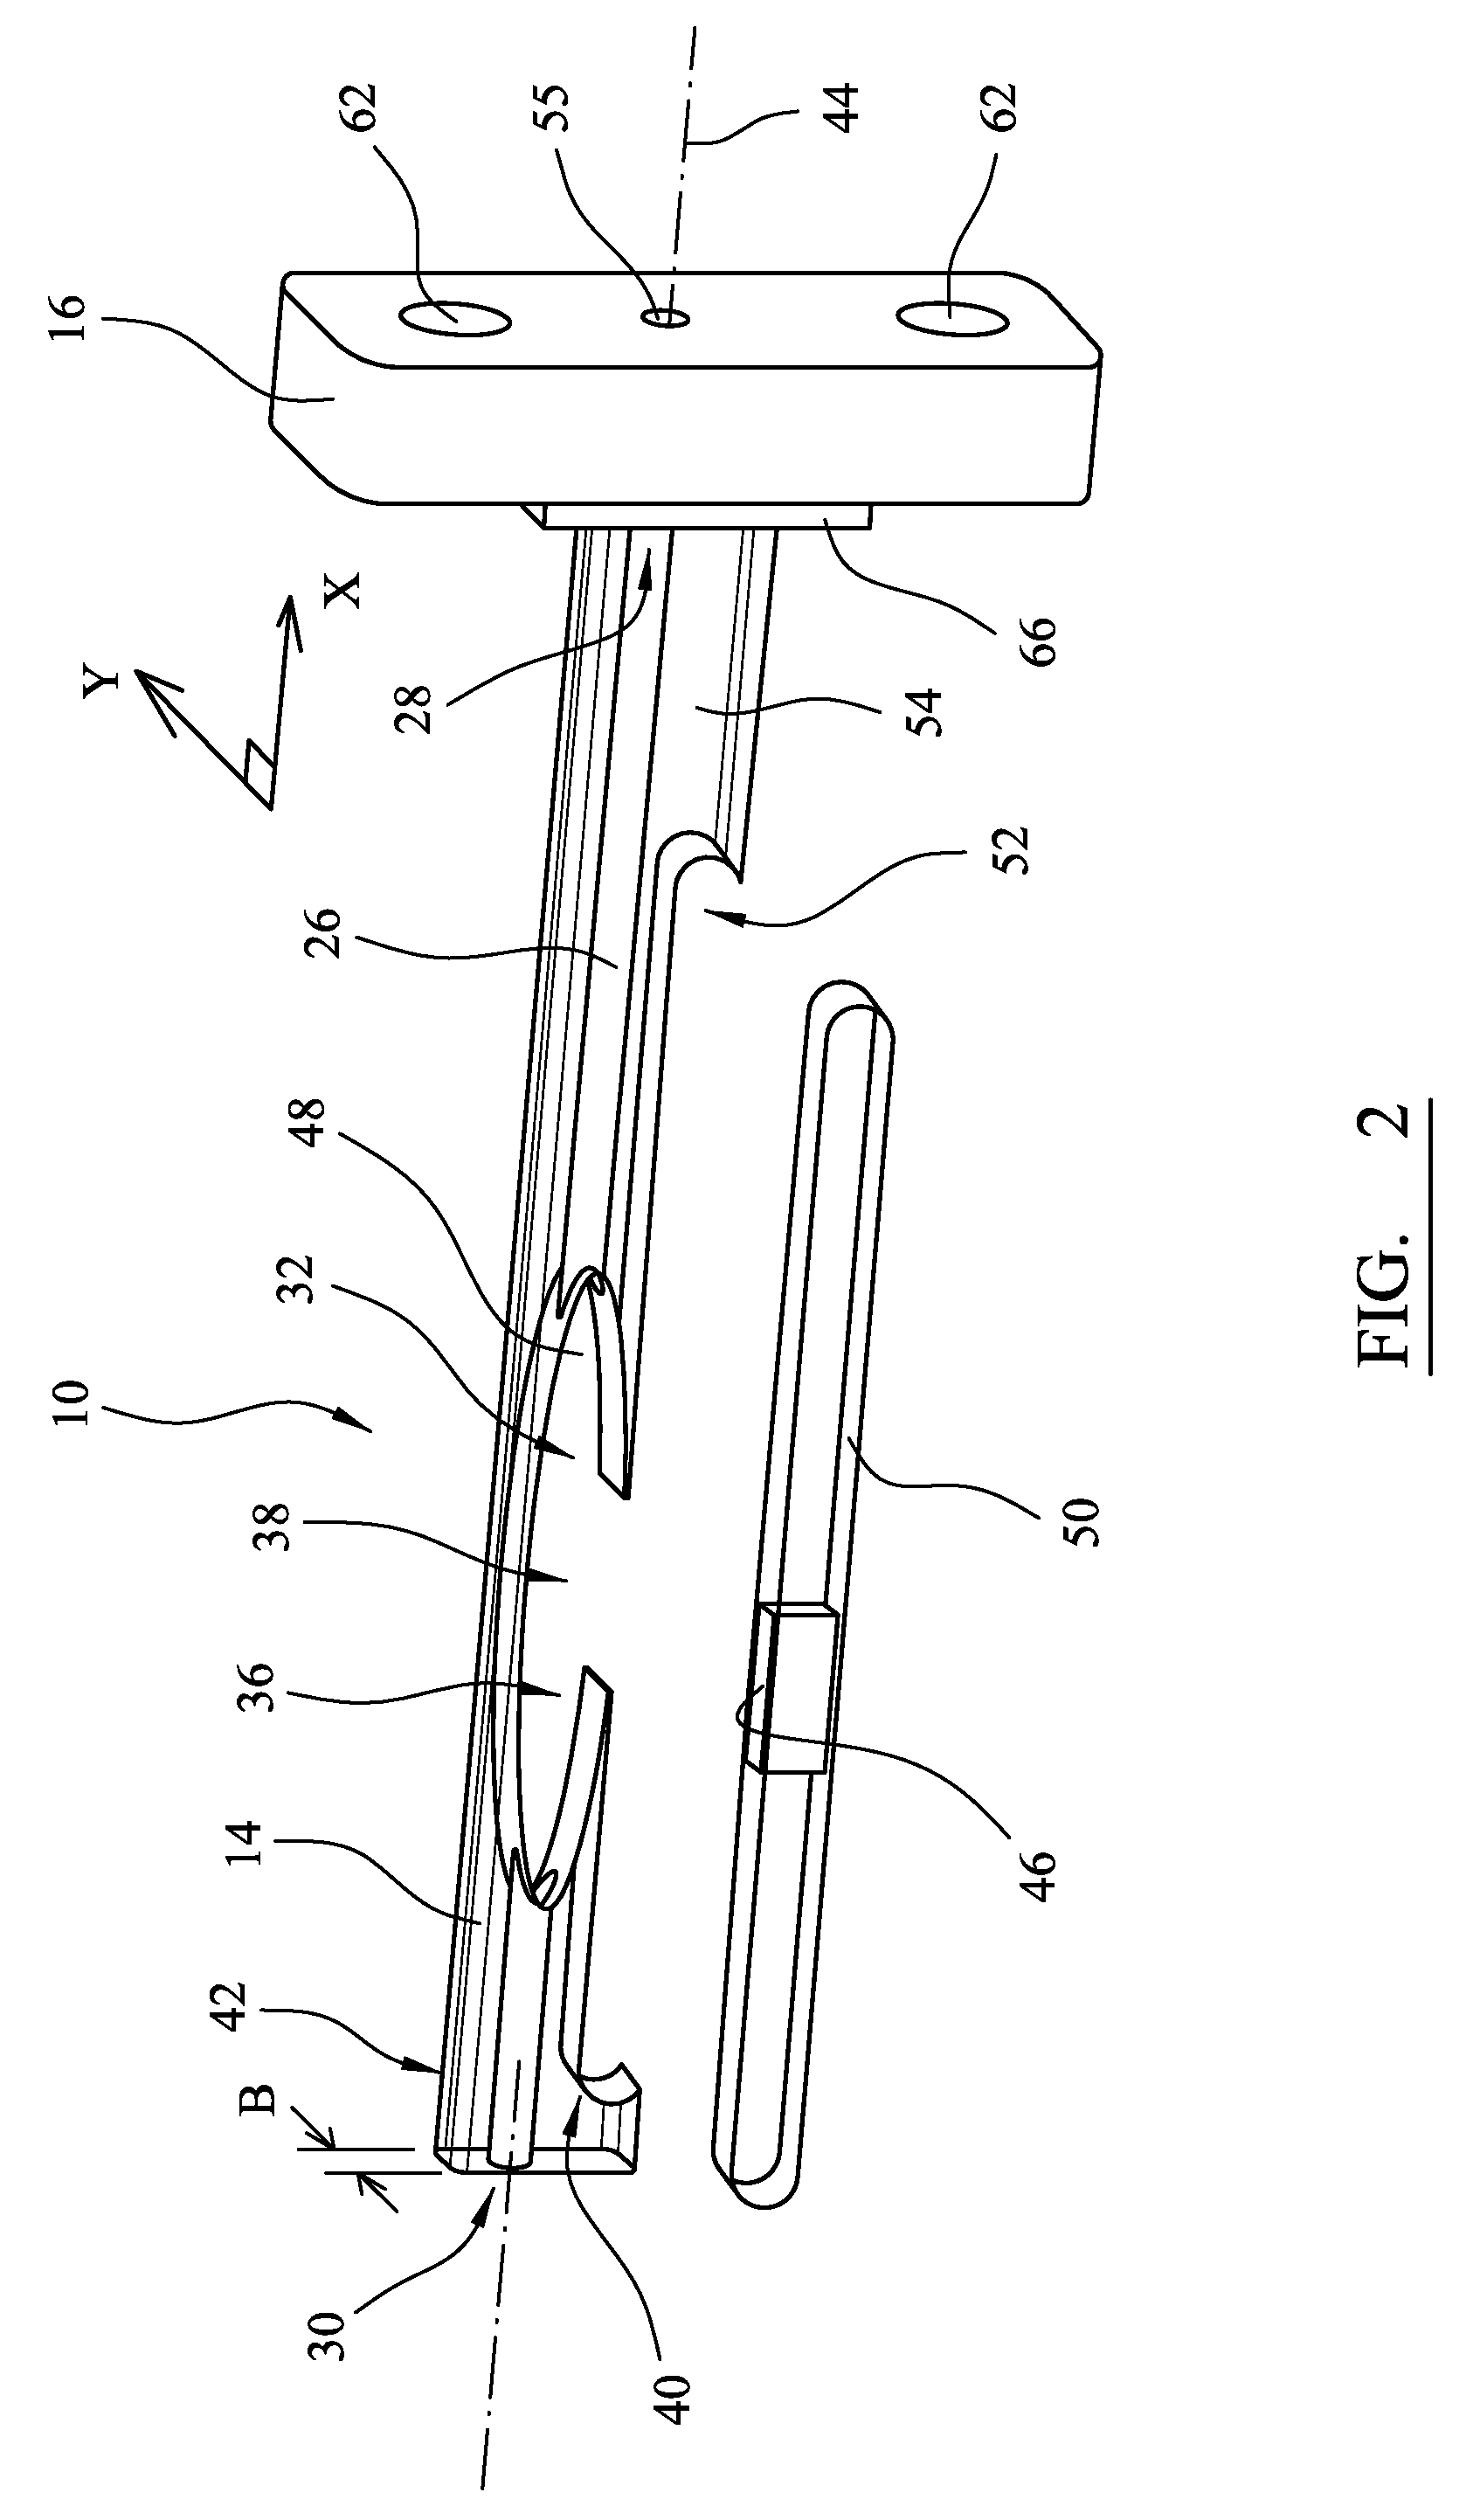 Optical assembly and method